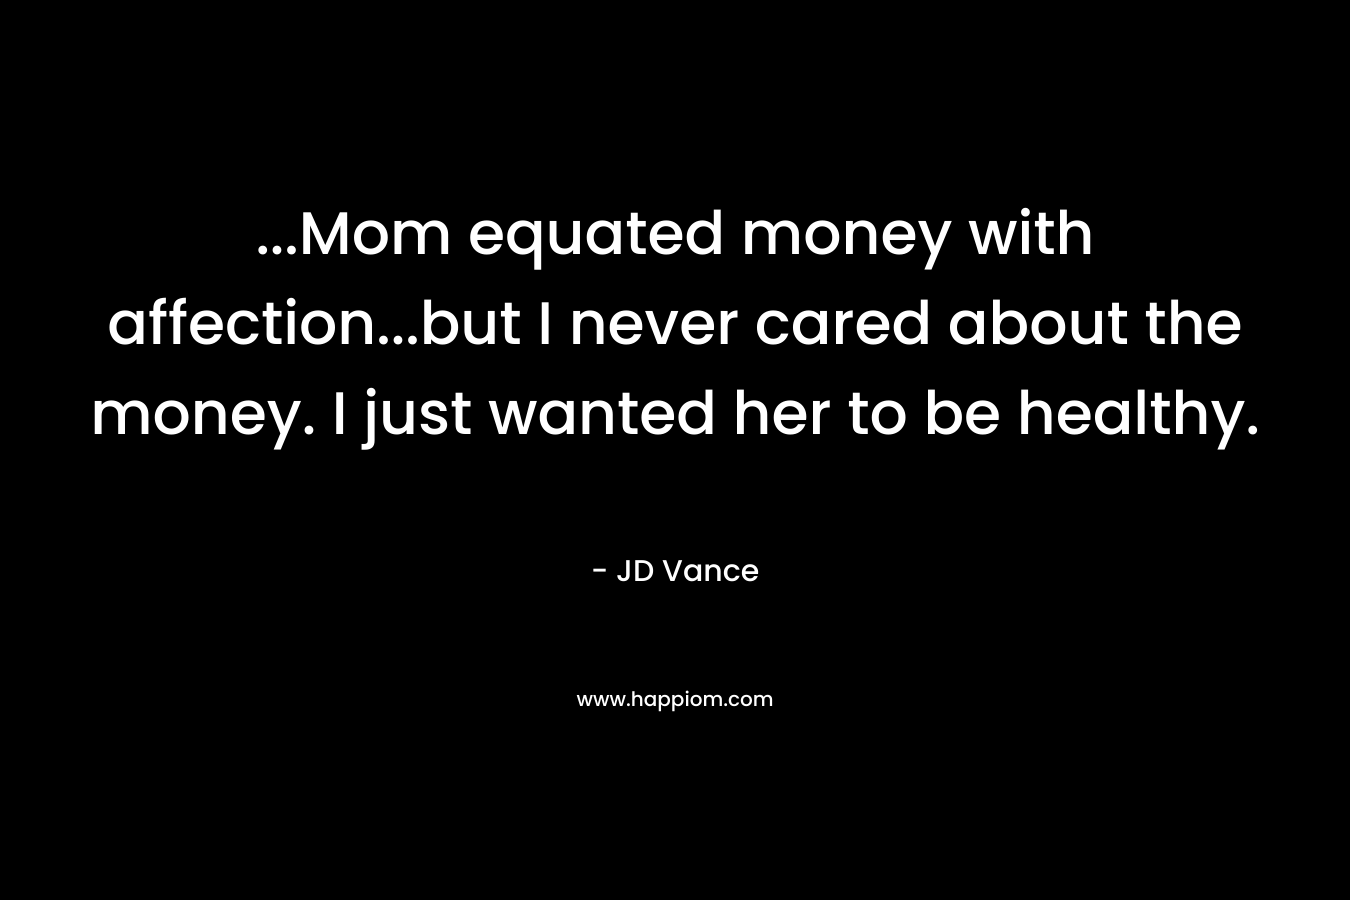 ...Mom equated money with affection...but I never cared about the money. I just wanted her to be healthy.